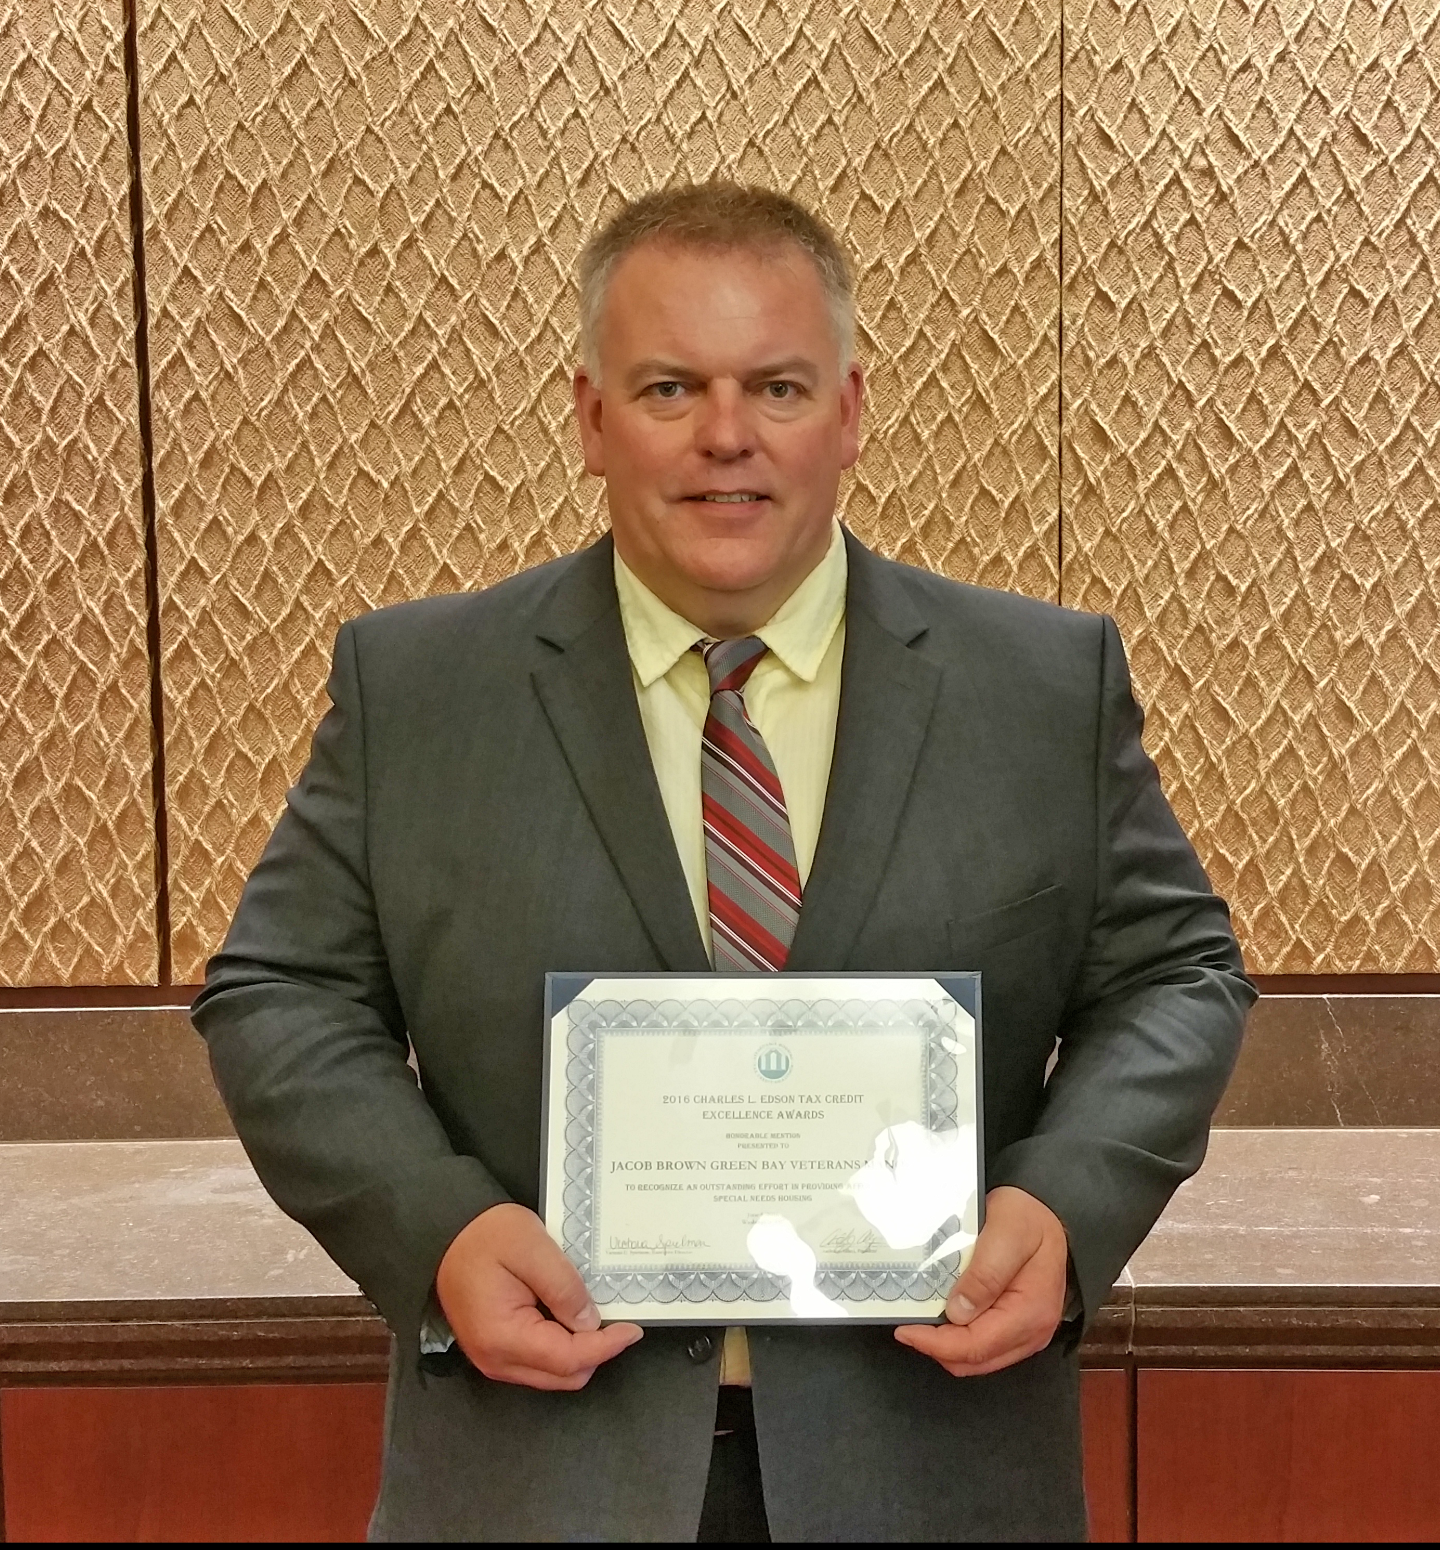 Michael Routheau, on-site Property Manager at Major General Jacob Brown Green Bay Veterans Manor, was present at the Edson Awards ceremony in Washington, DC June 2016 to receive the Honorable Mention certificate.